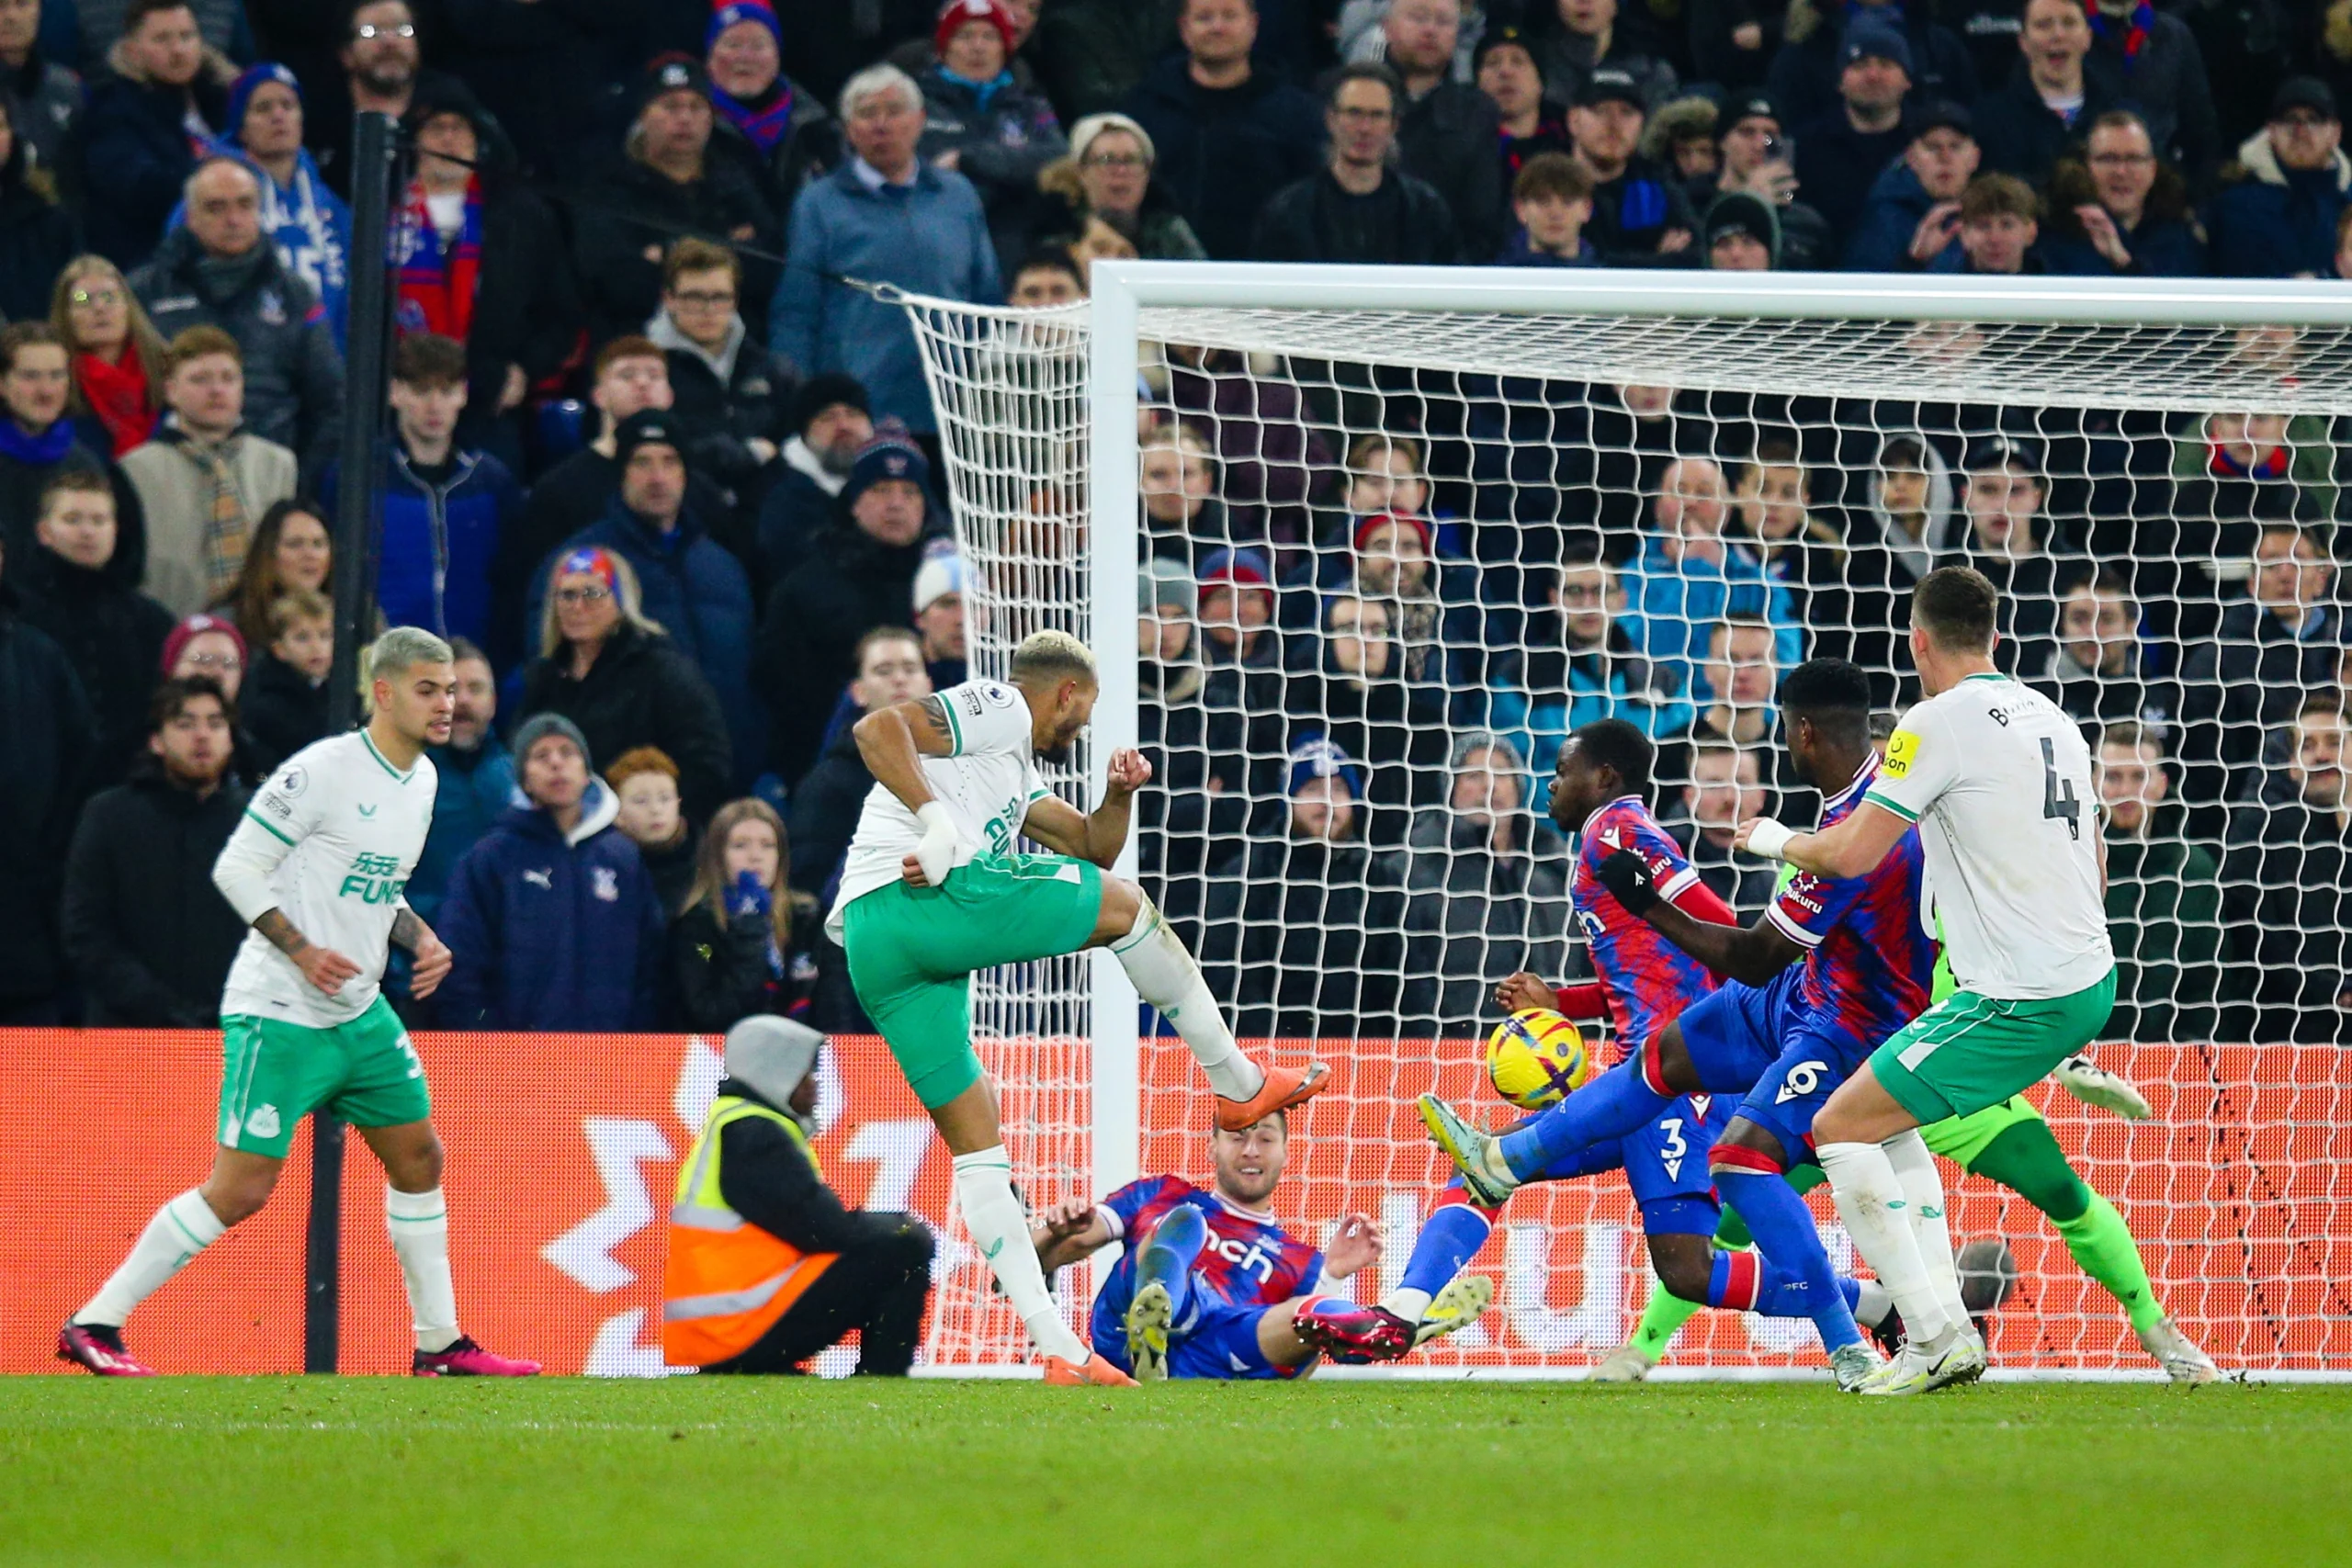 Crystal Palace 0-0 Newcastle: Plenty of positives as Toon fall short in final third